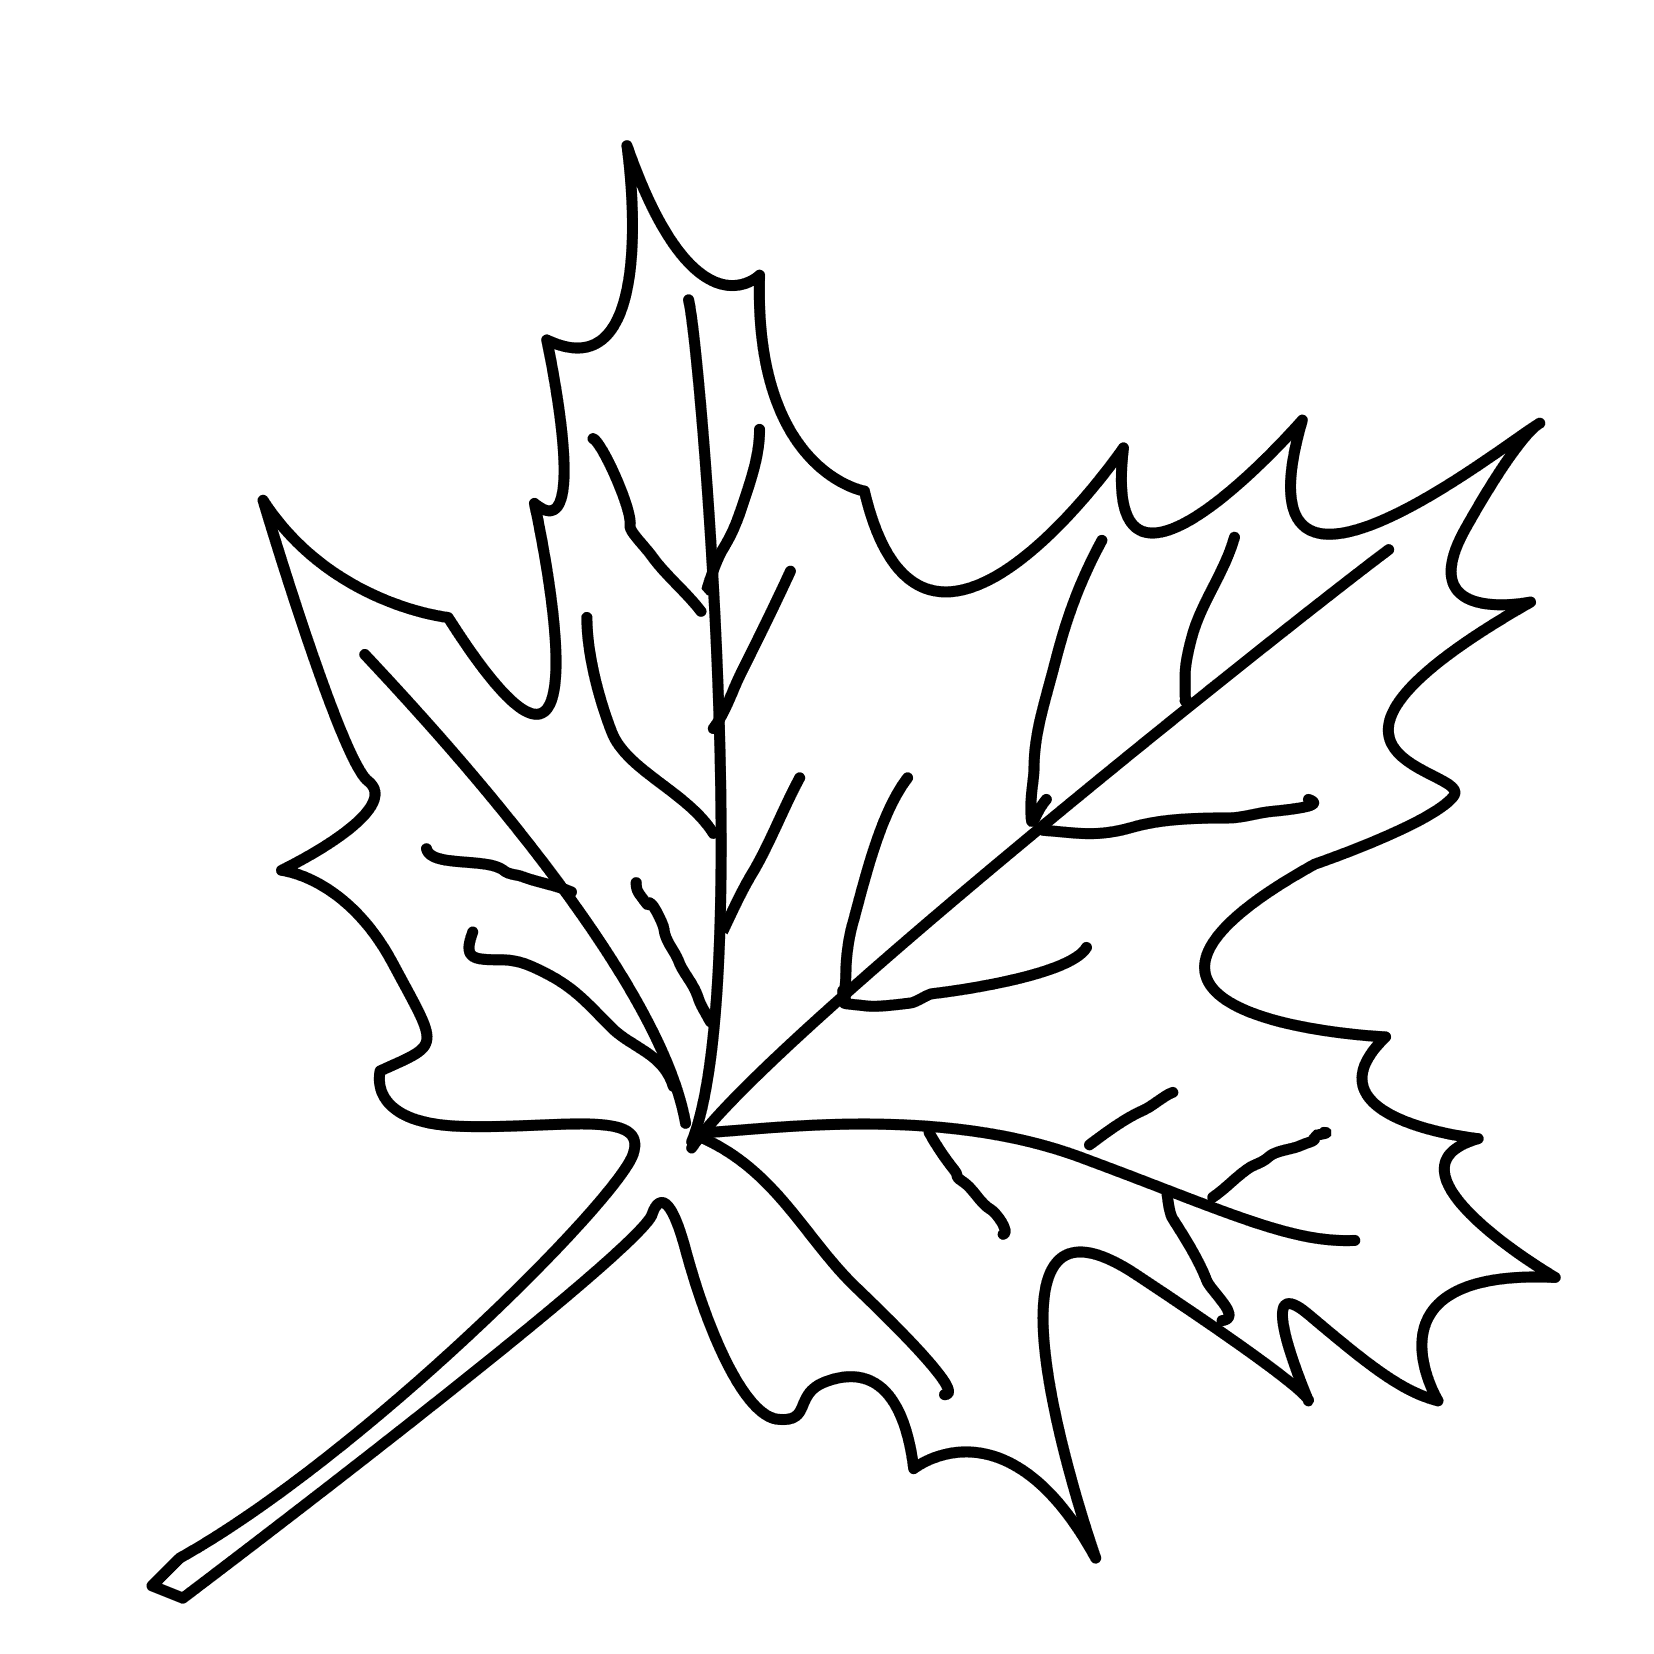 Pics Photos - Tree Leaves Coloring Page